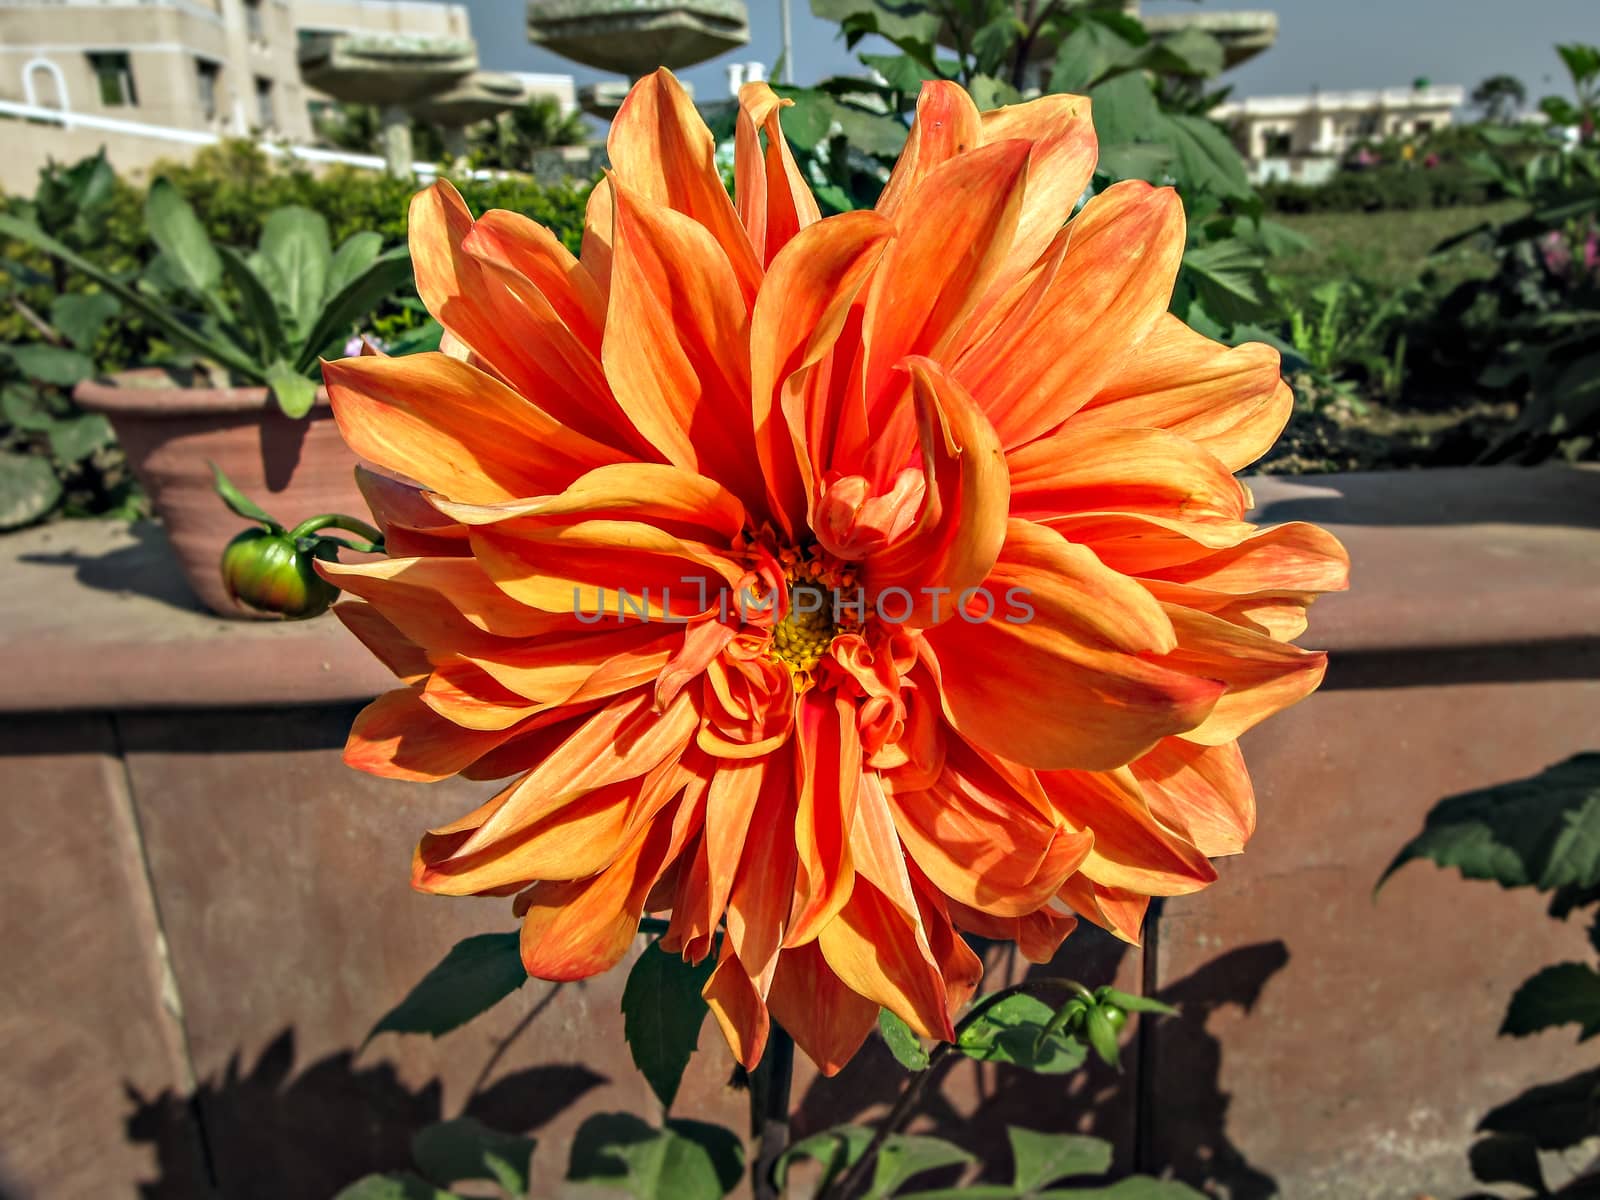 Selective focus, blur background, close up image of bright orange Dahlia flower in park with green background..